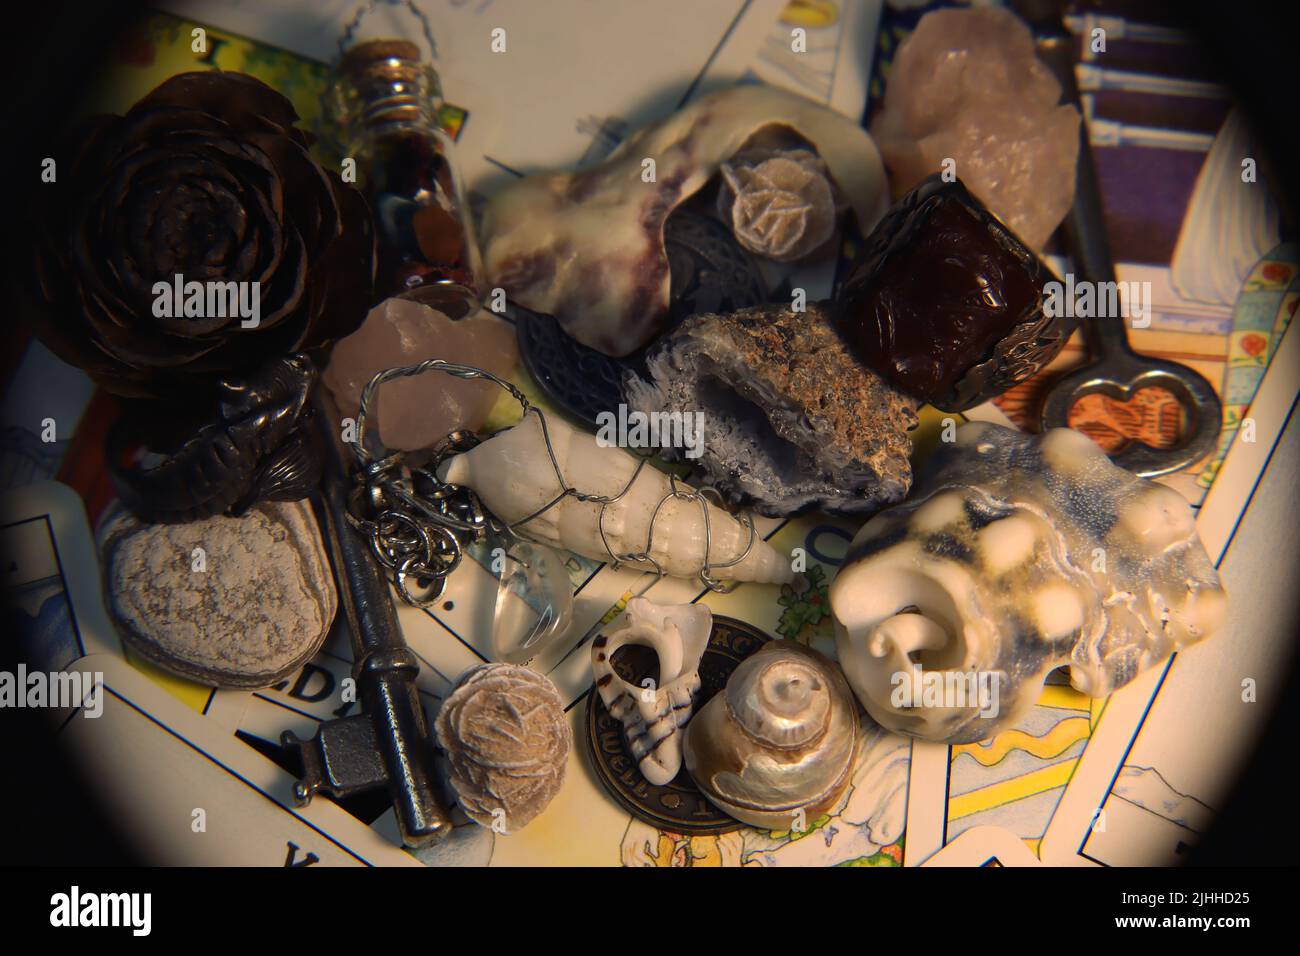 A collection of items likely found in someone's trinket box, or a goblin's pockets. Tarot card background. Stock Photo